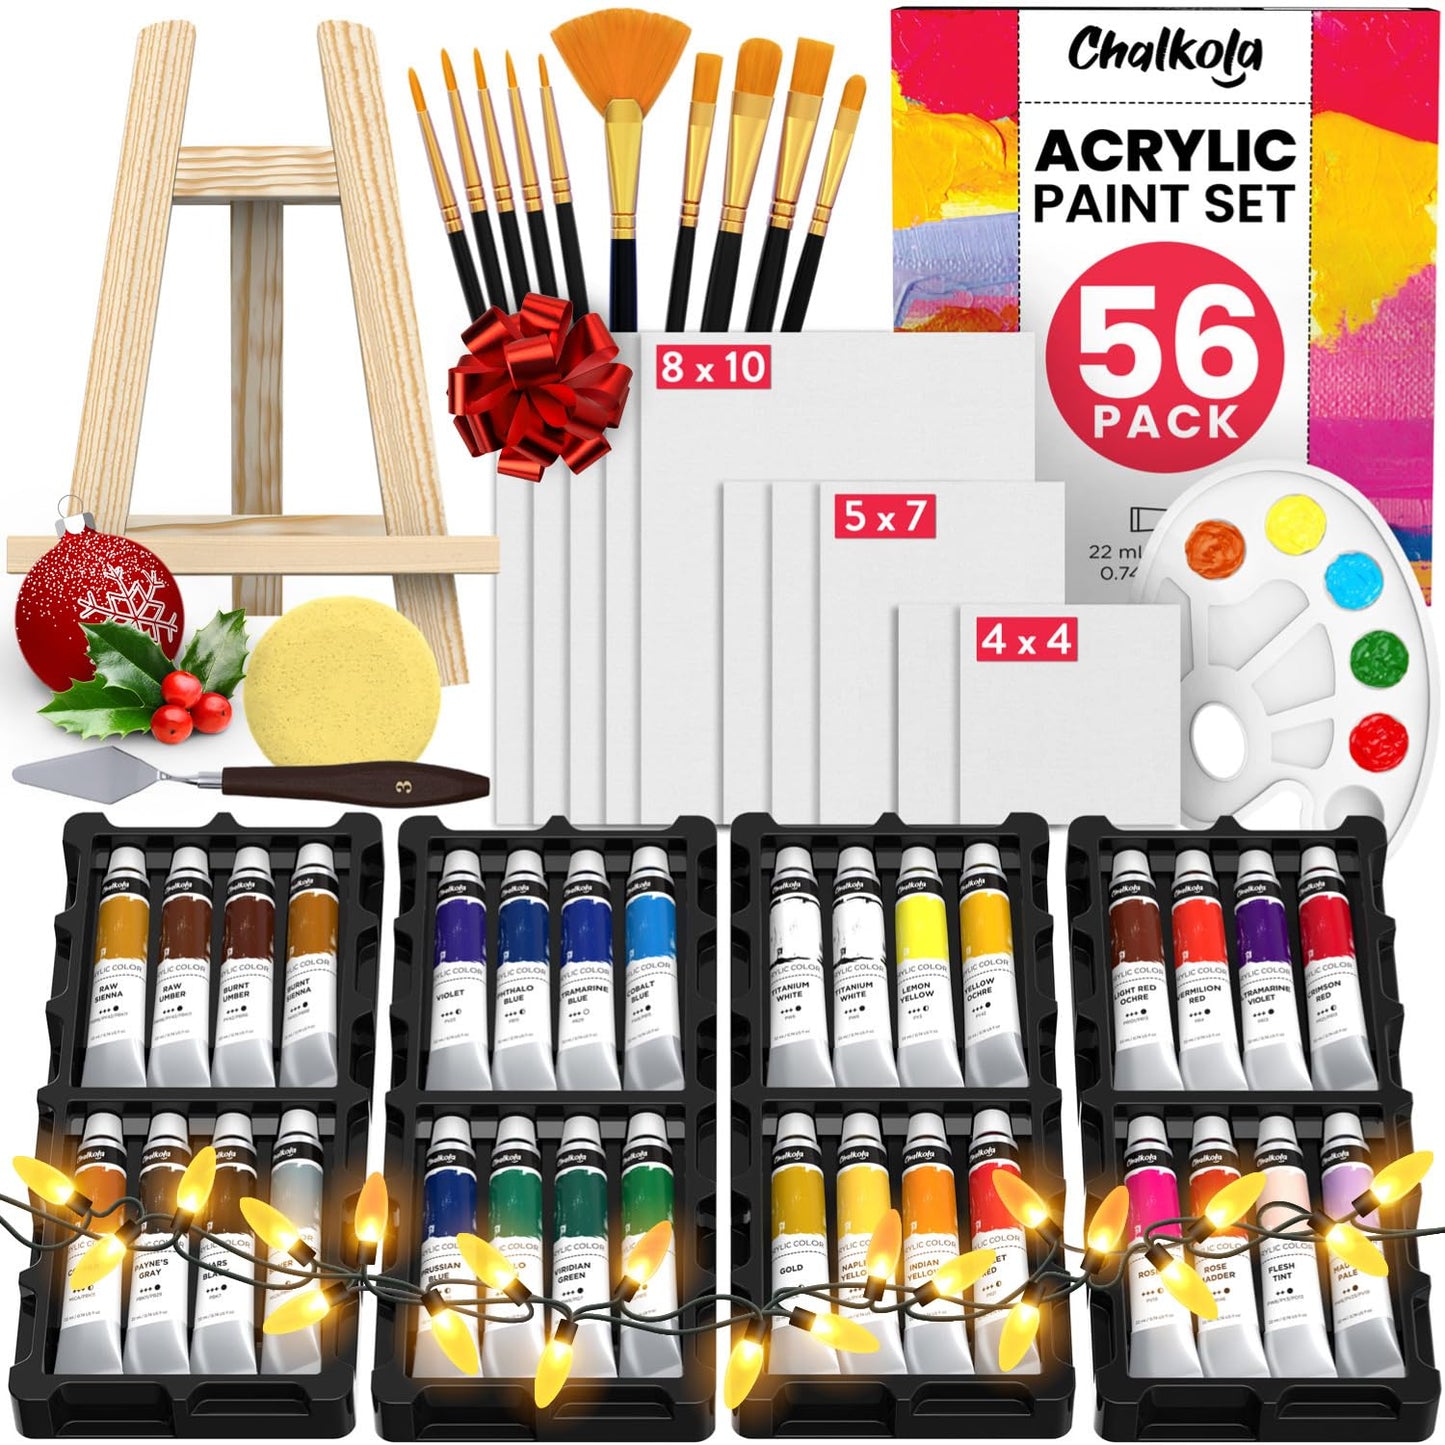 Chalkola Acrylic Paint Set for Adults & Kids - 56 Pcs Canvas Painting Kit with 32 Paints (22ml), 10 Brushes, 10 Canvases, Tabletop Easel, Palette,